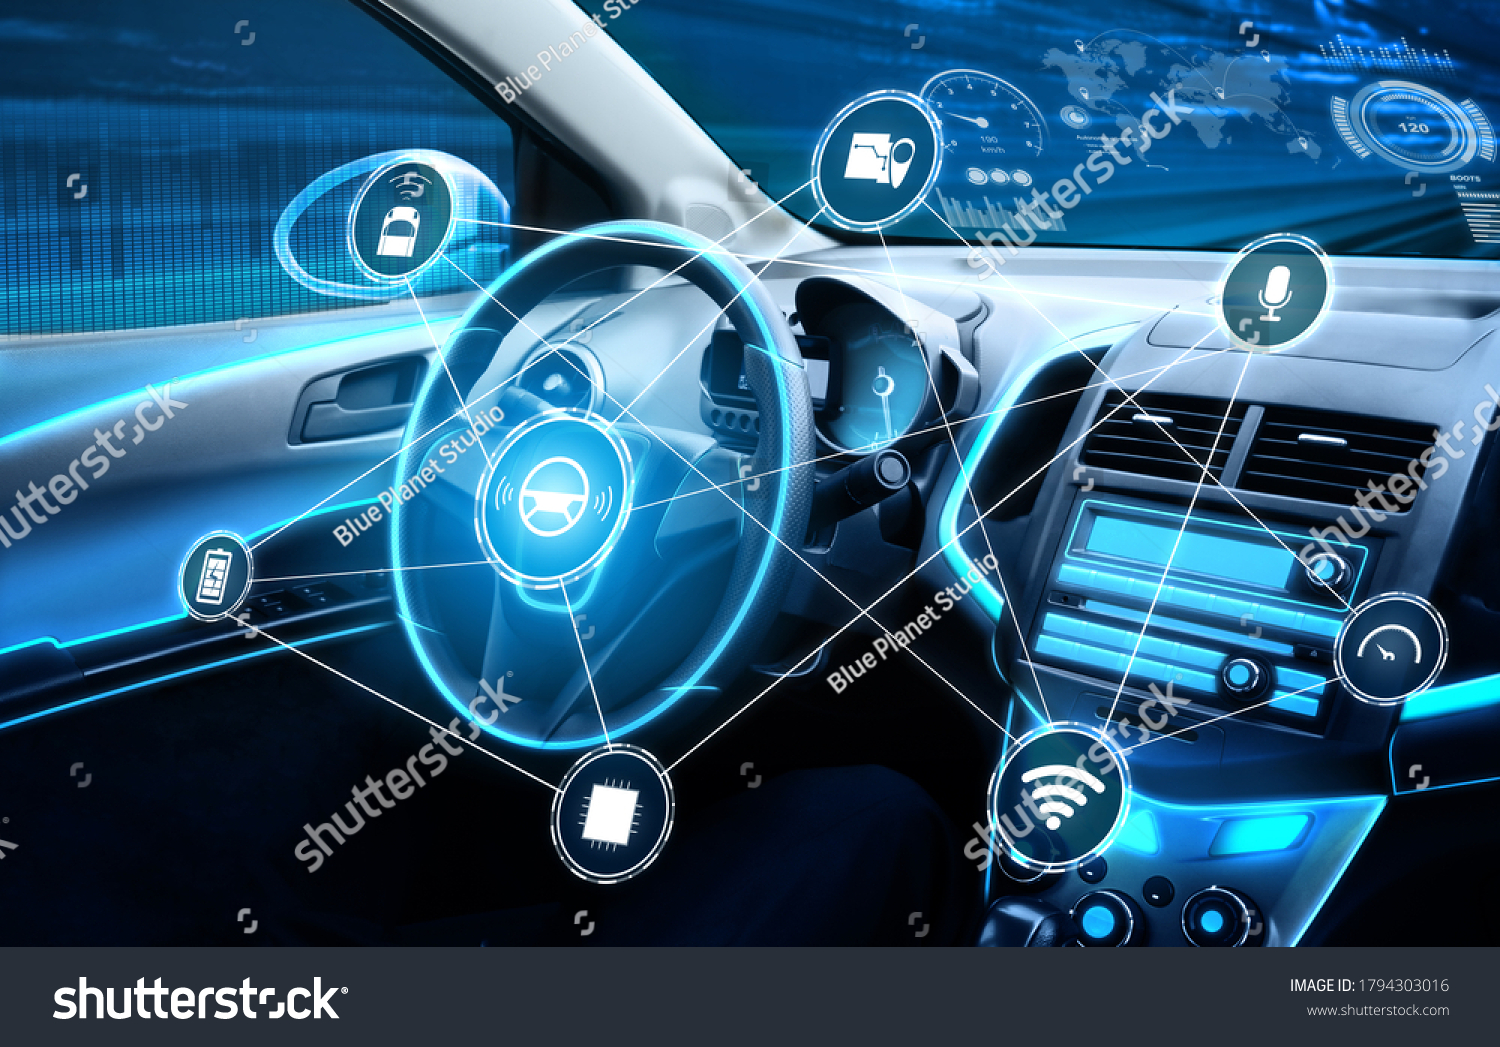 Driverless car interior with futuristic dashboard for autonomous control system . Inside view of cockpit HUD technology using AI artificial intelligence sensor to drive car without people driver . #1794303016